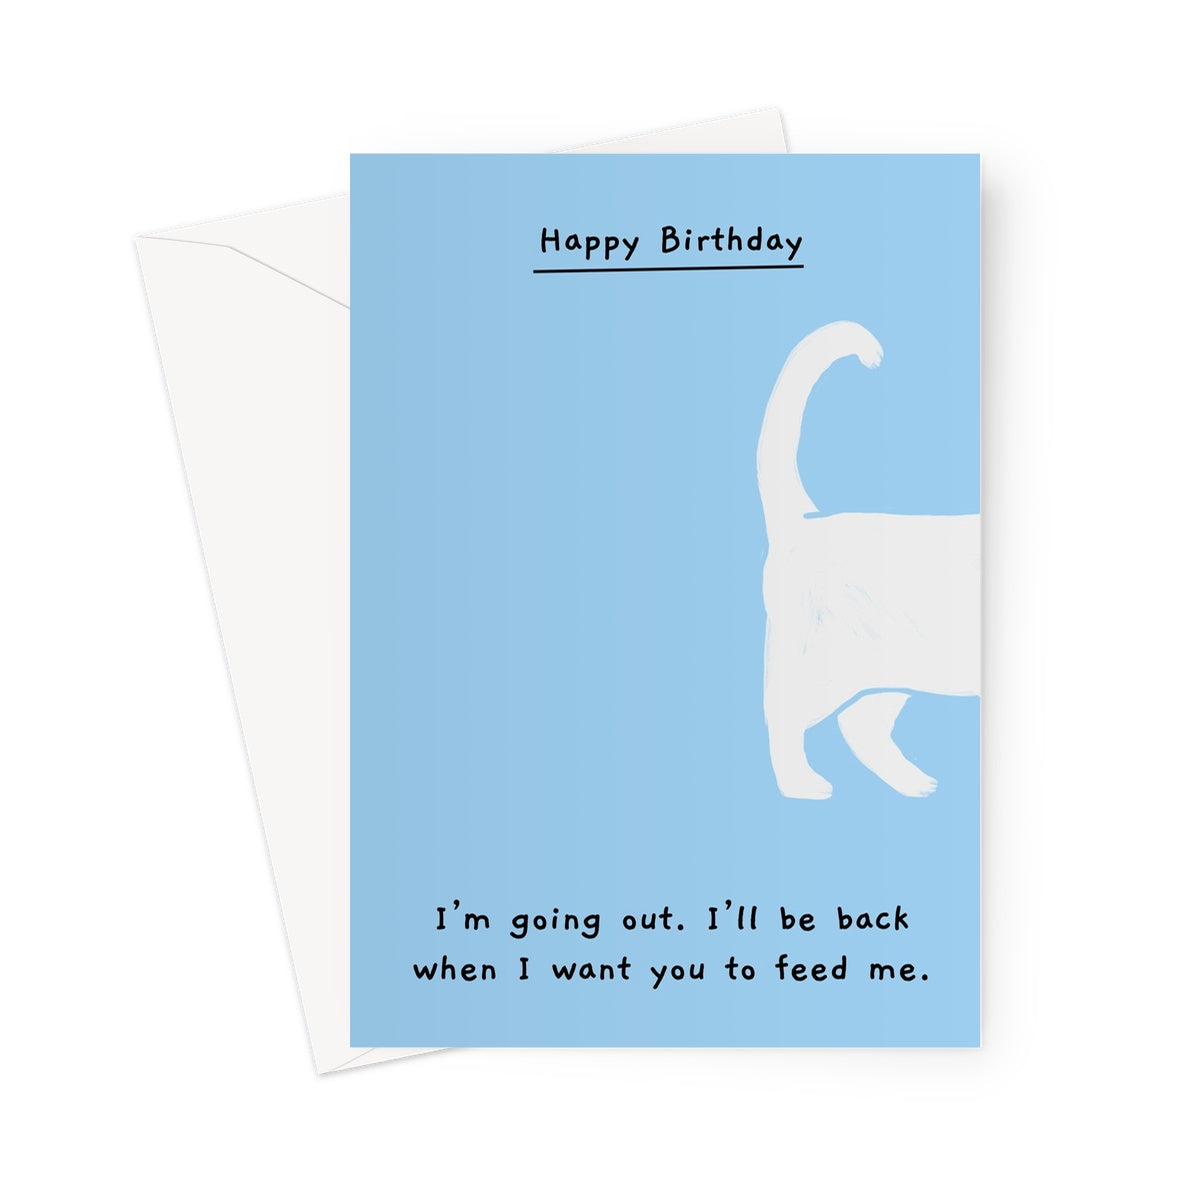 Ken the cat i'm going out happy birthday card in blue